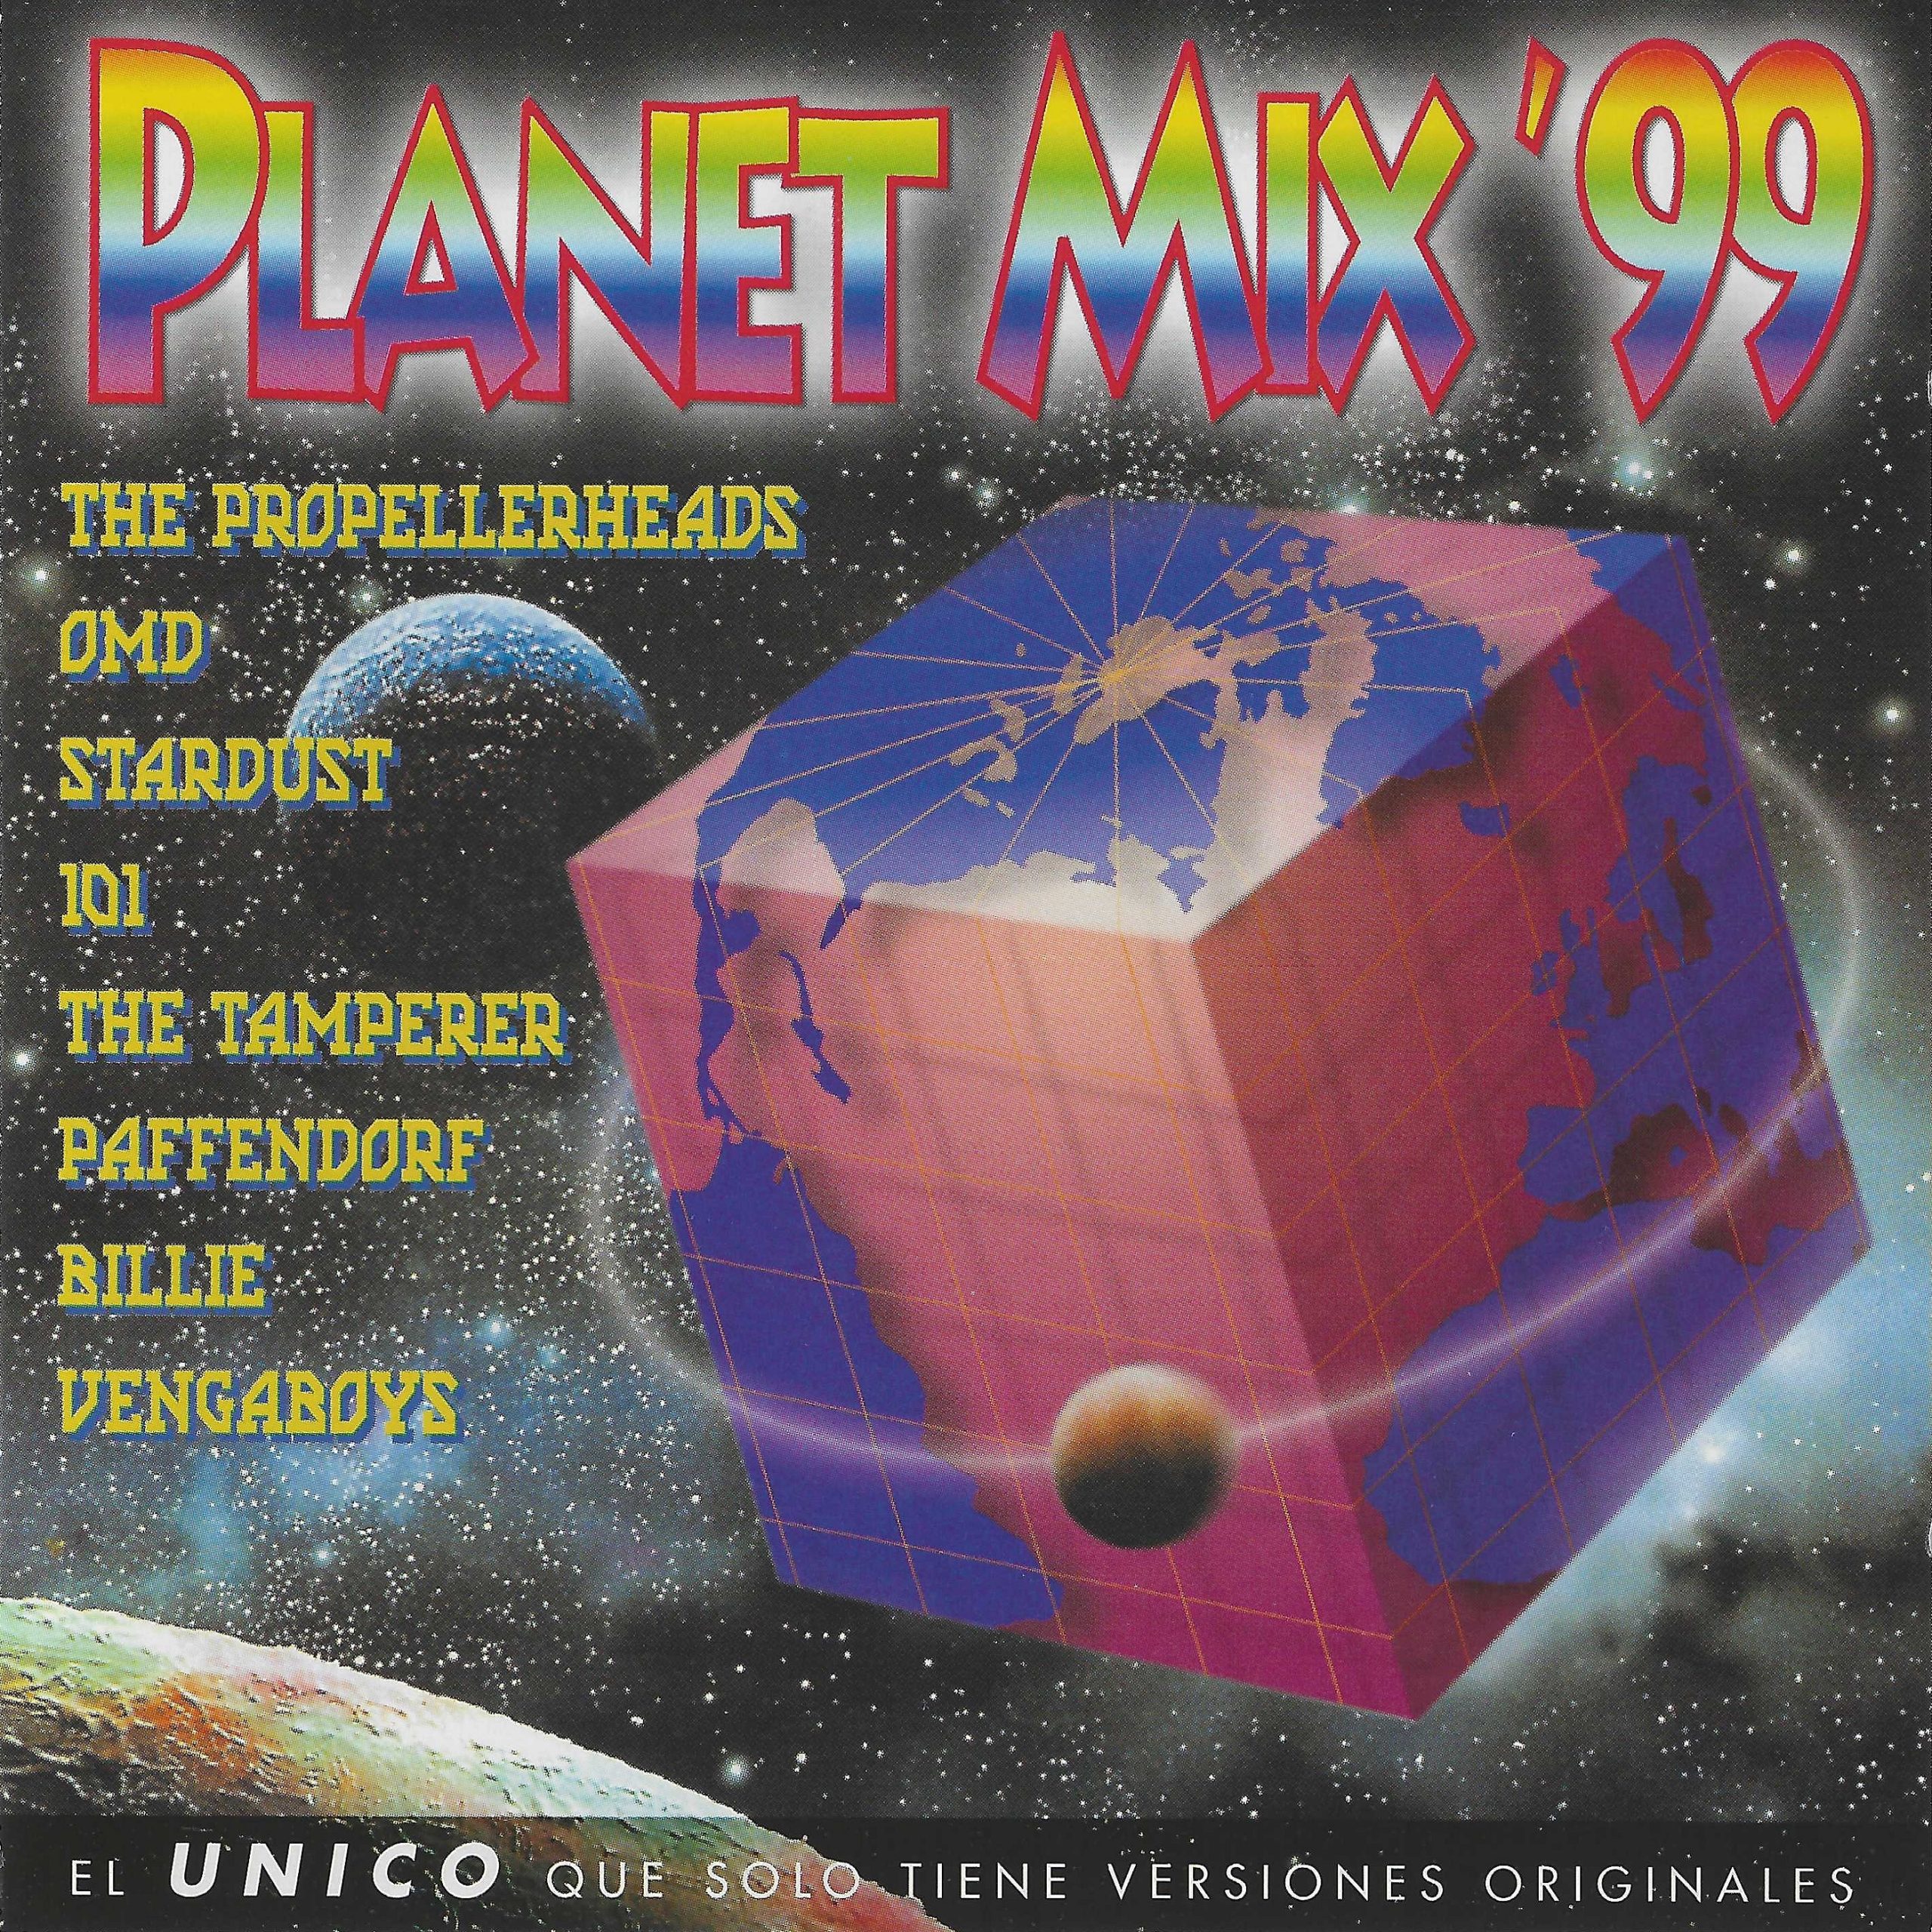 99 Планета. Emy Care read my Mind Extended Disco Mix. Paffendorf Planet Dance. Mix planet